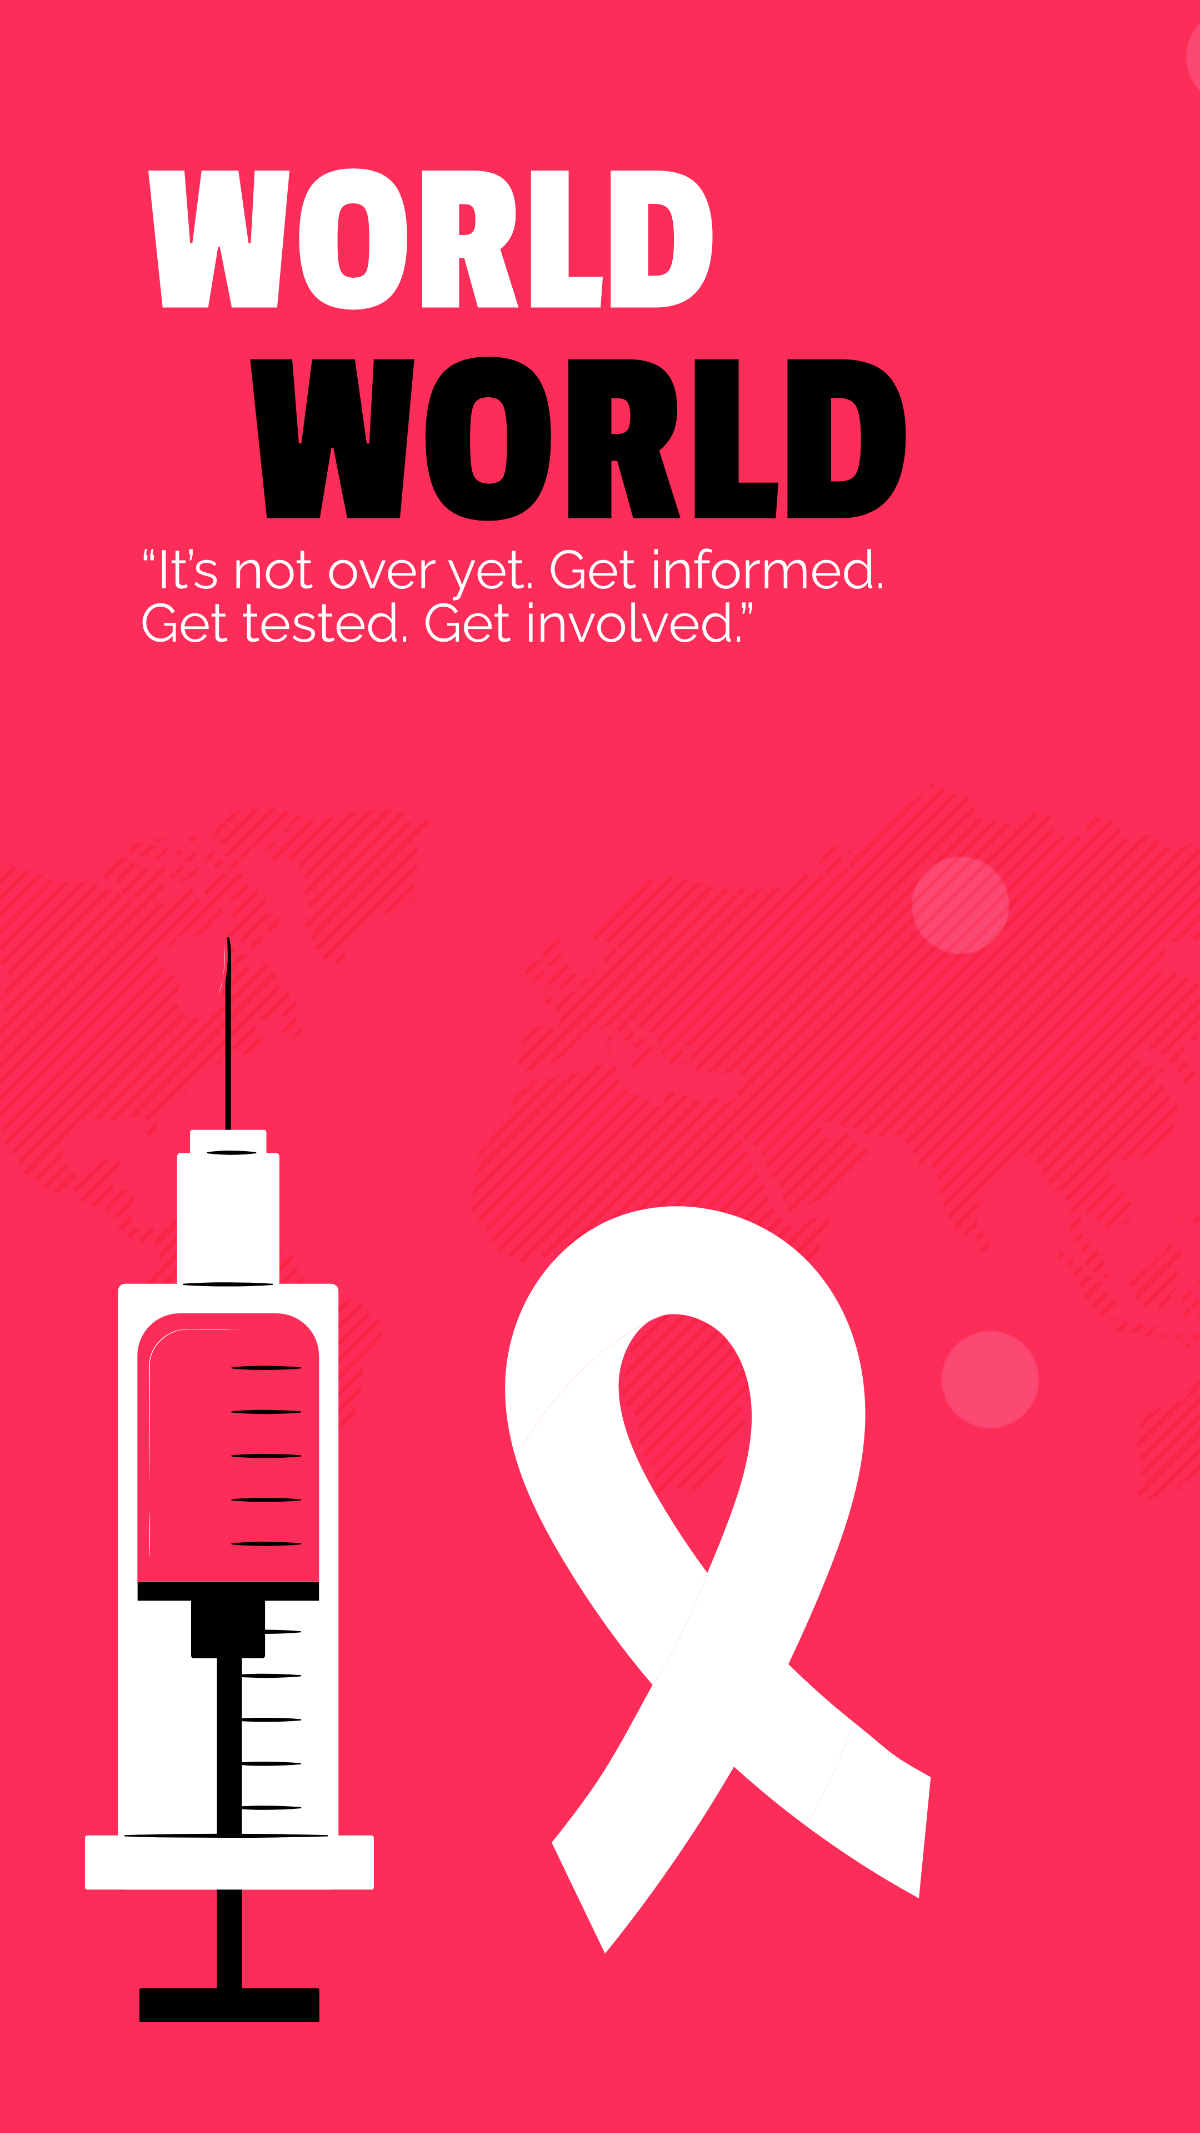 Free Worlrd AIDS Awareness Quote Template